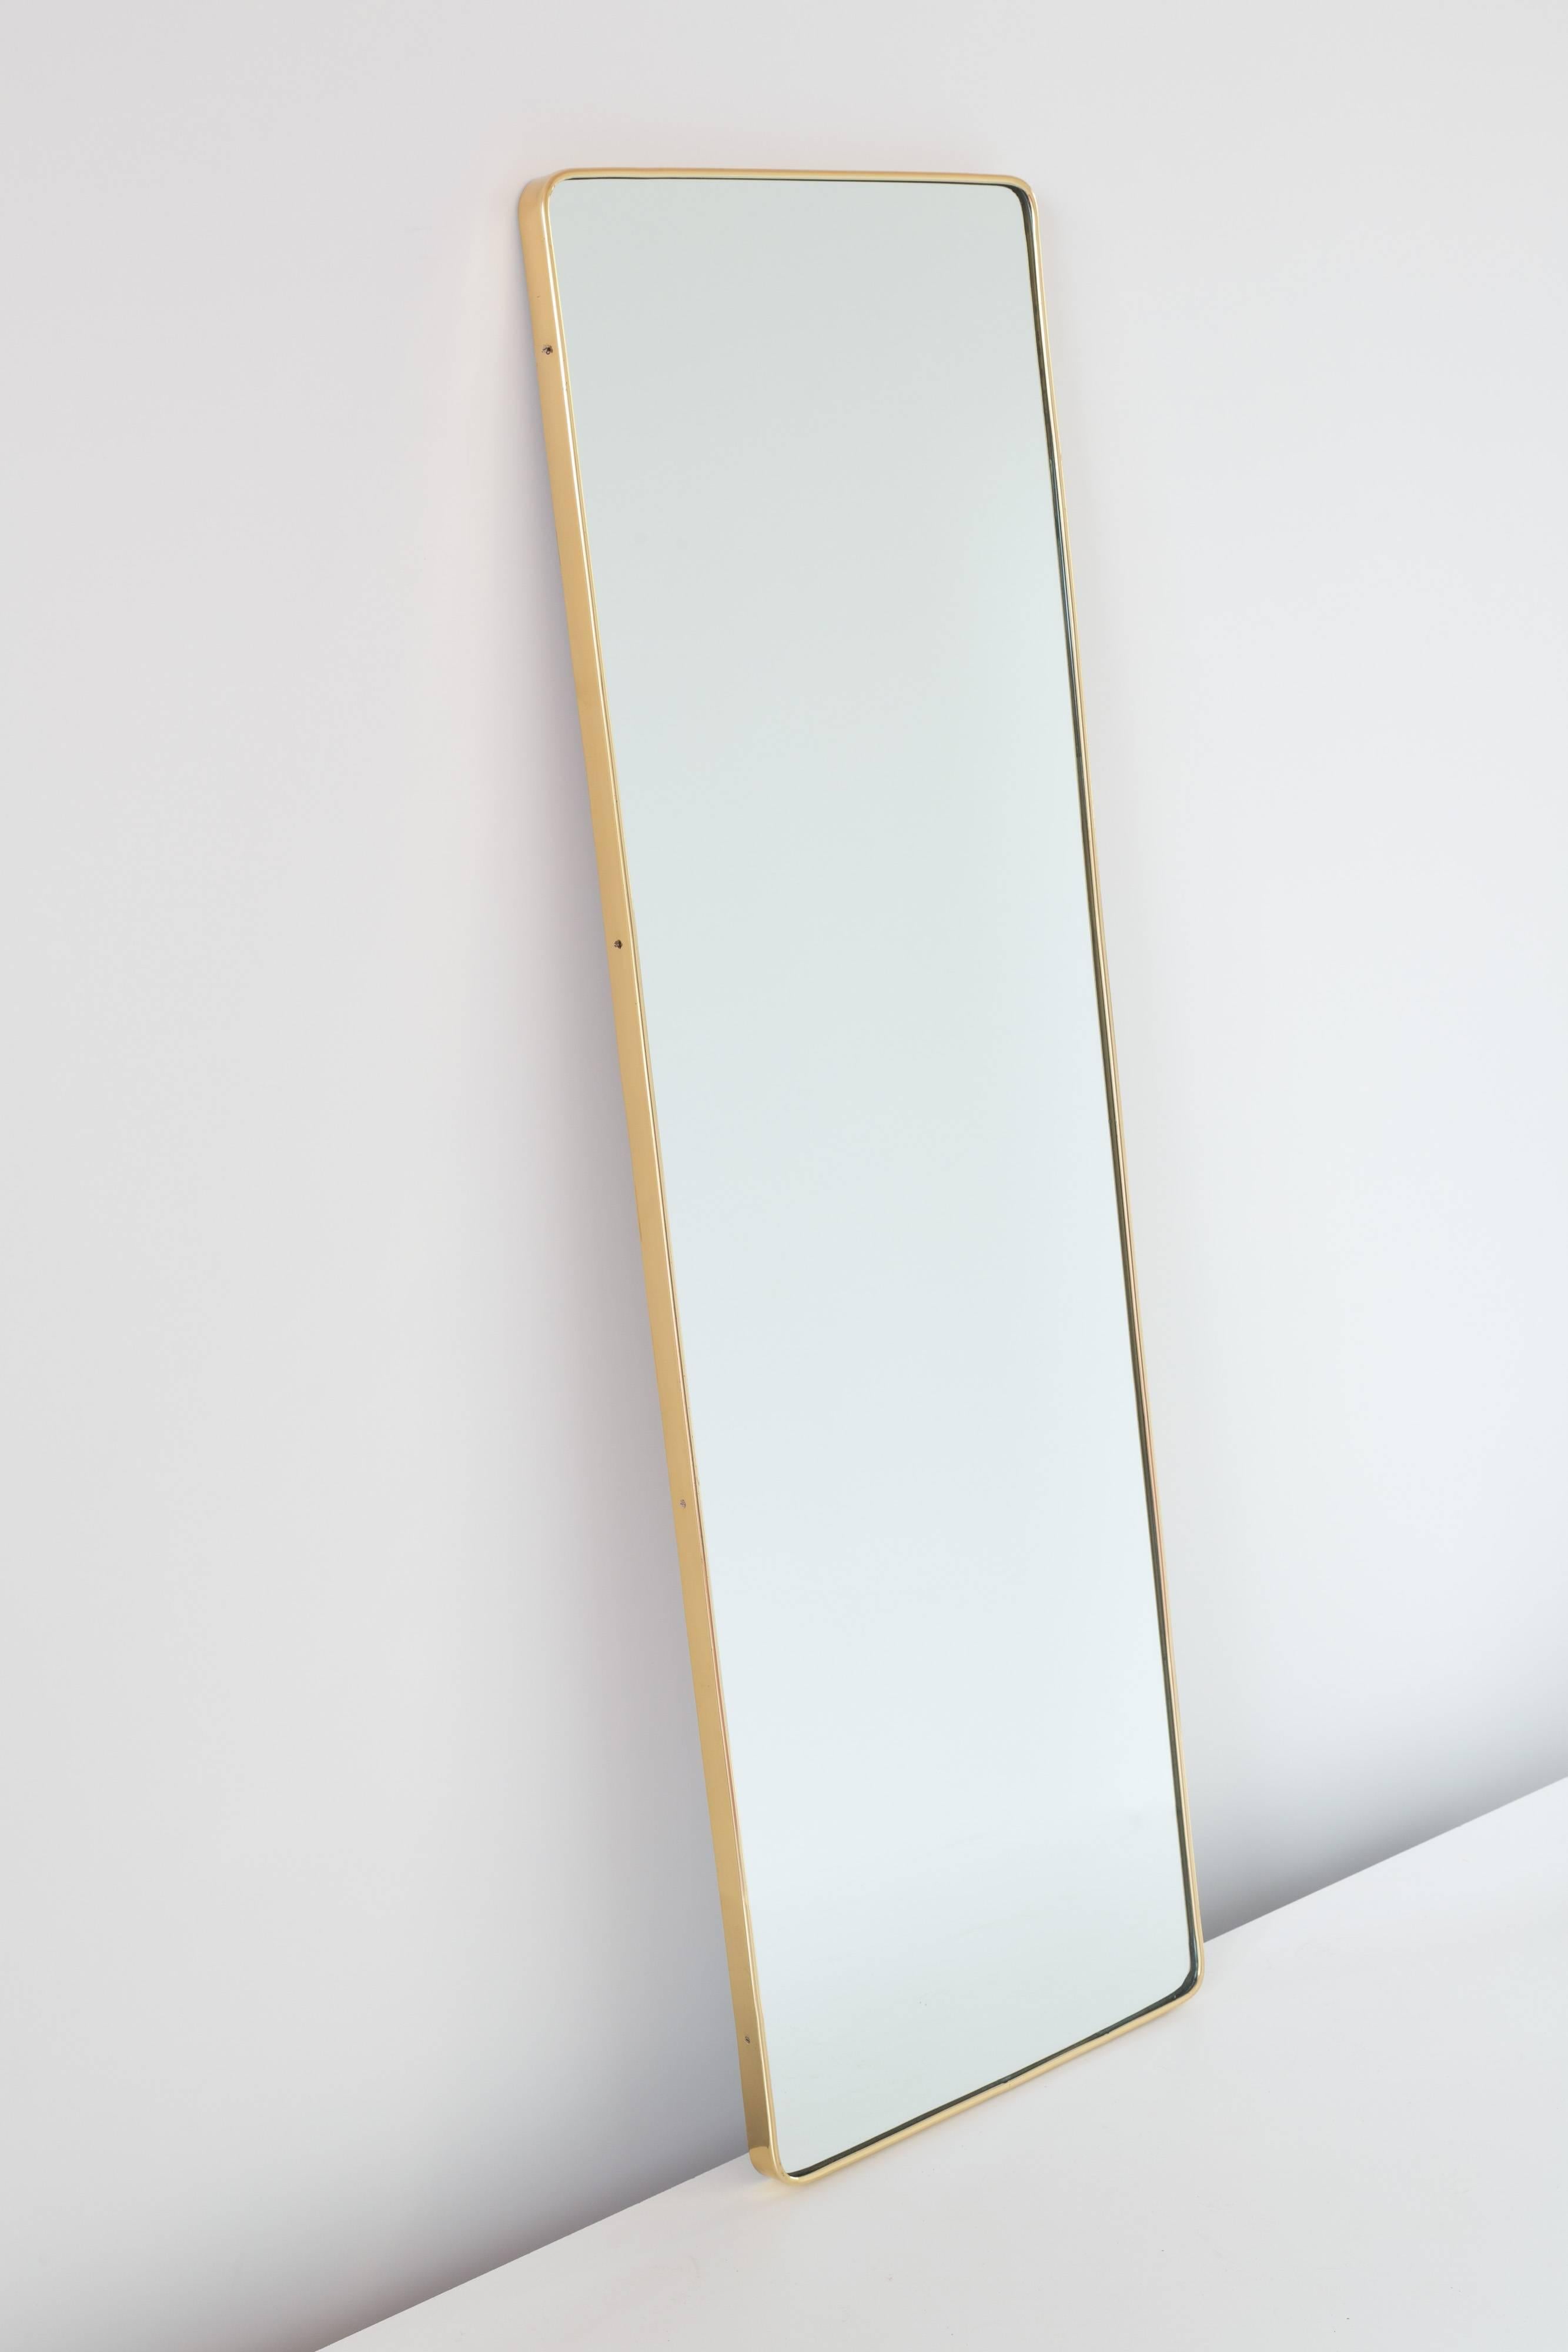 Gio Ponti mirror from the original furniture of the hotel Parco dei Principi, Rome, 1964. 
Manufactured by Fontana Arte. 
Measures: H 144 cm, 46 x 3. 
Brass, mirror and walnut.
Sold with a copy of a letter of authentication from Lisa Licitra